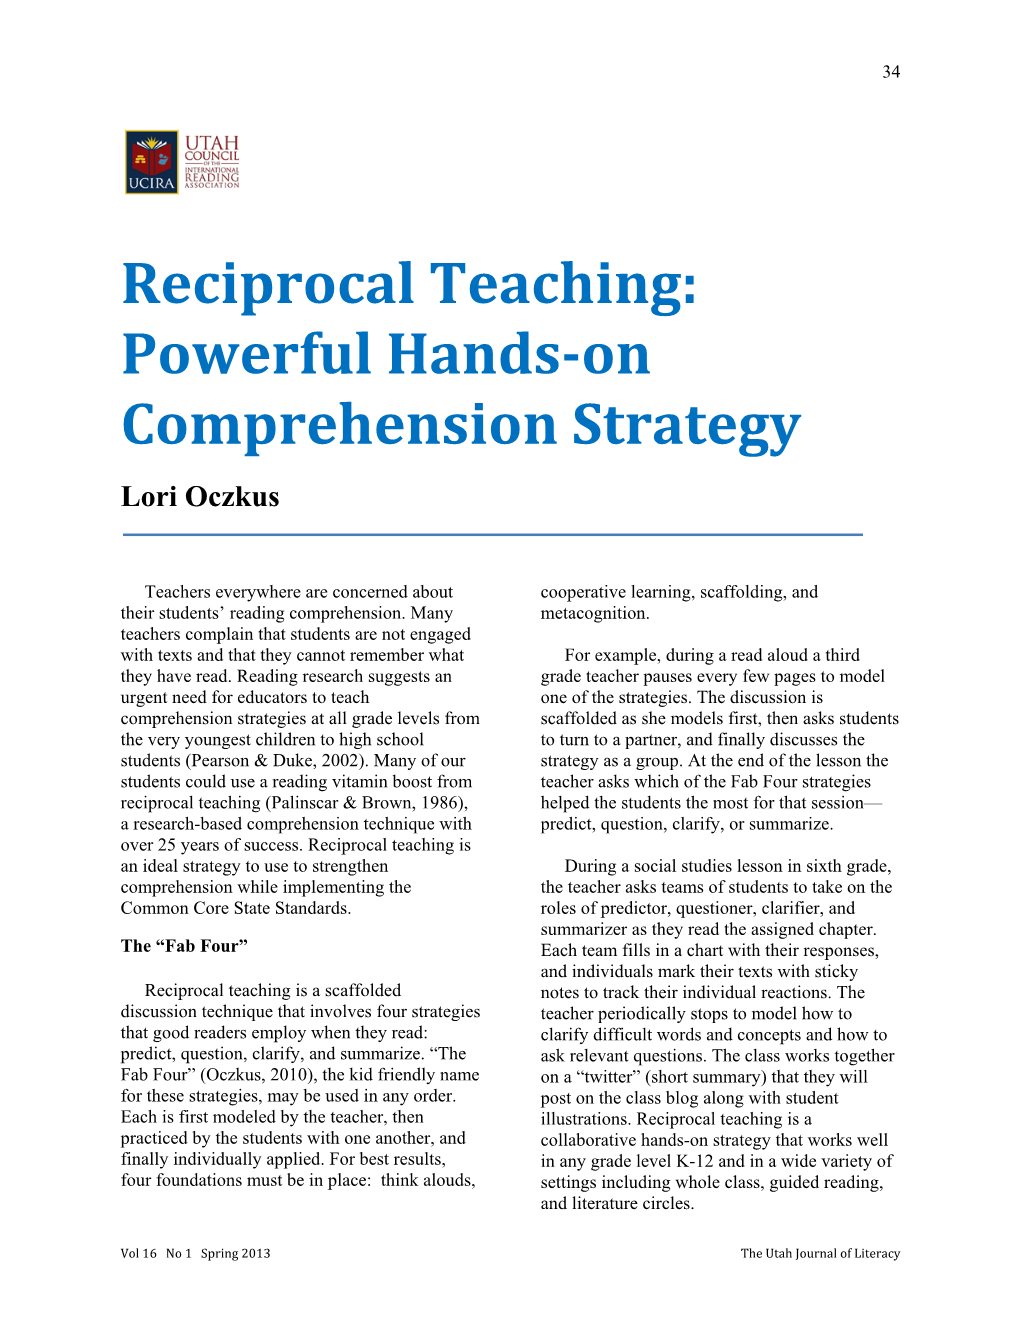 Reciprocal Teaching: Powerful Hands-On Comprehension Strategy